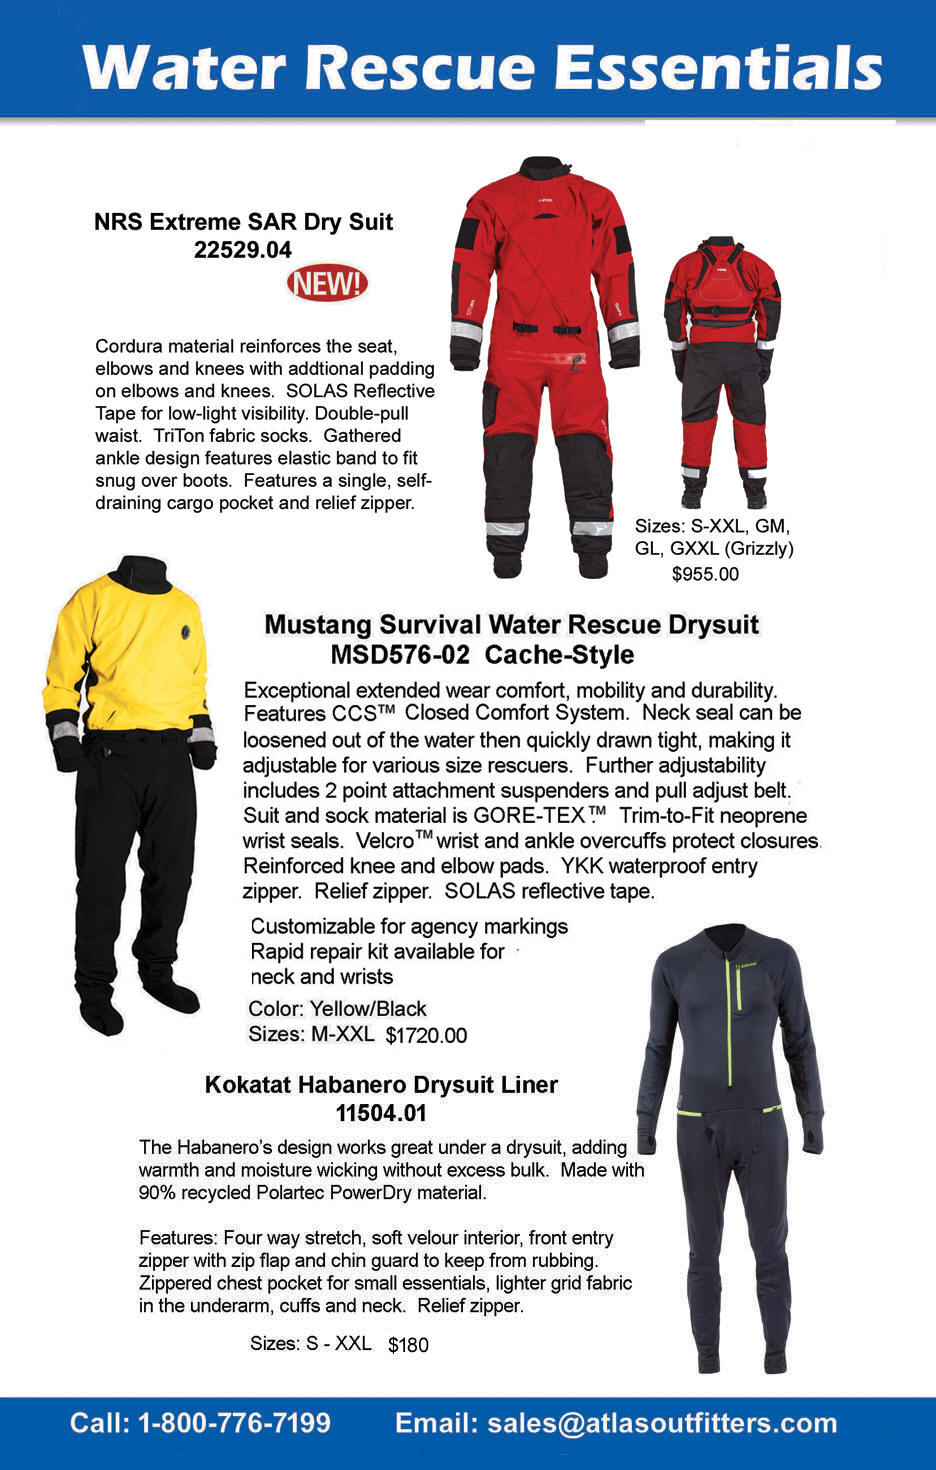 Swiftwater rescue drysuits from Mustang Survival and NRS